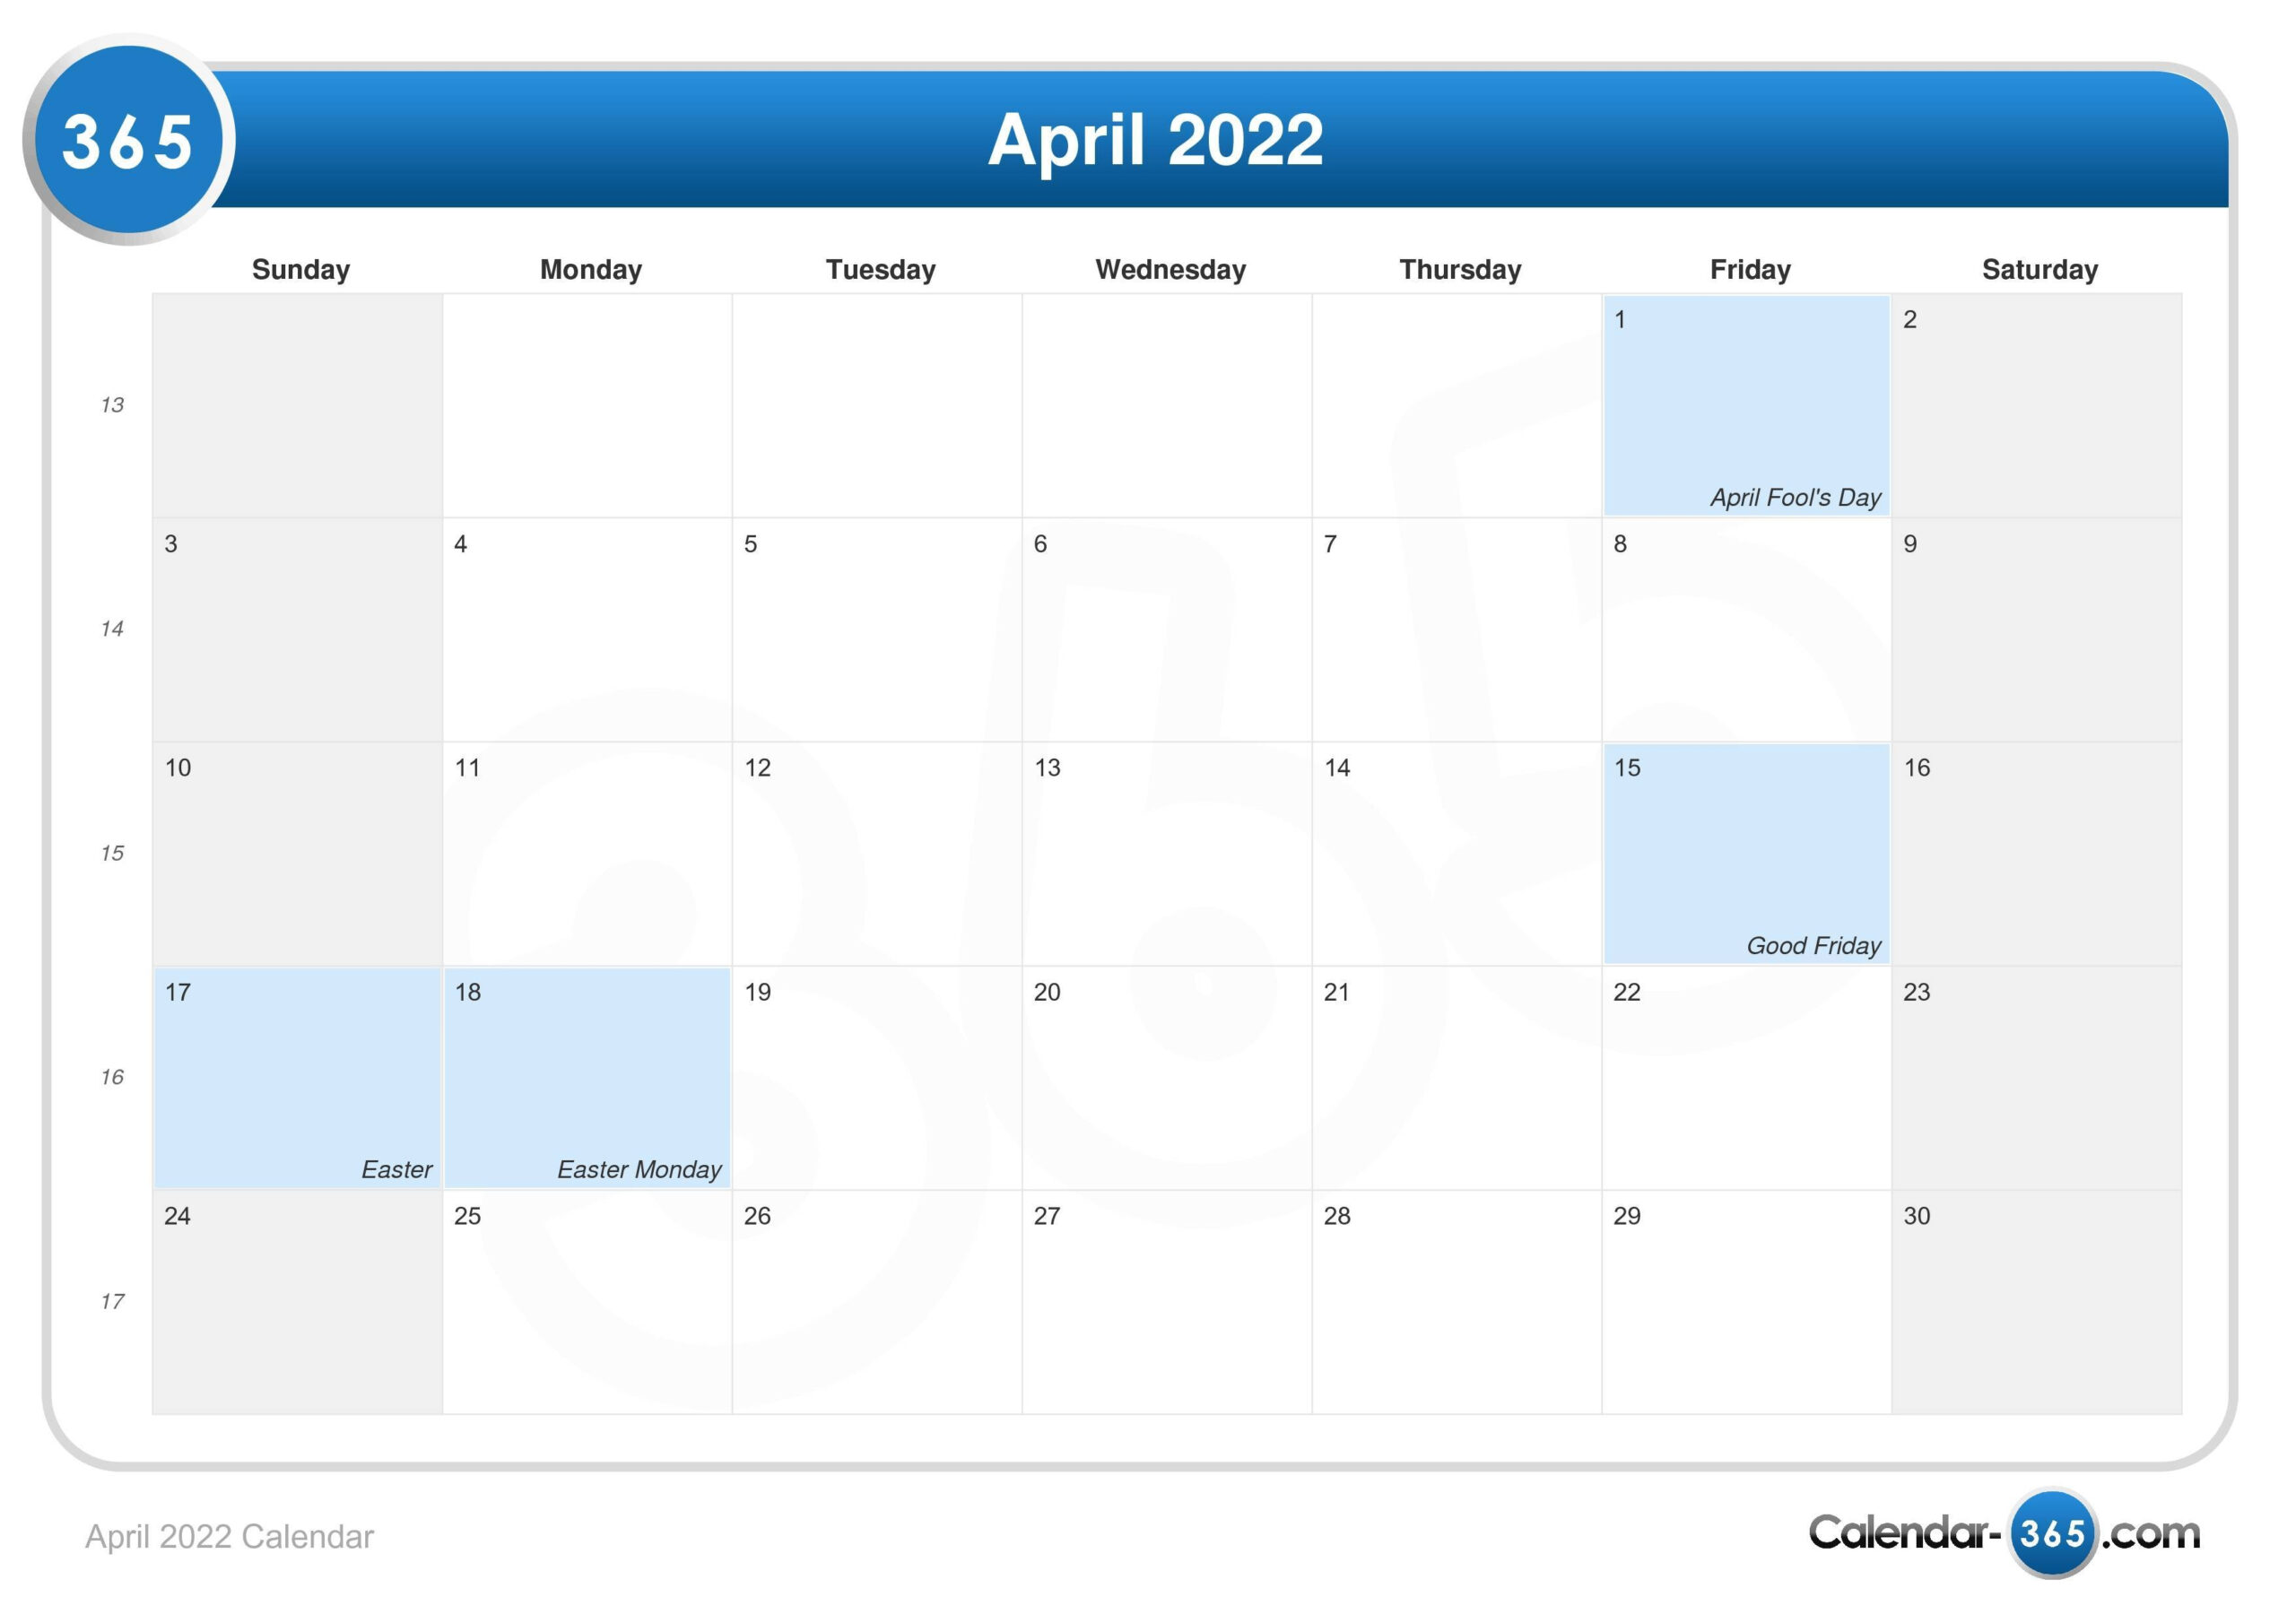 How Many Months To April 2022 Best Calendar Example